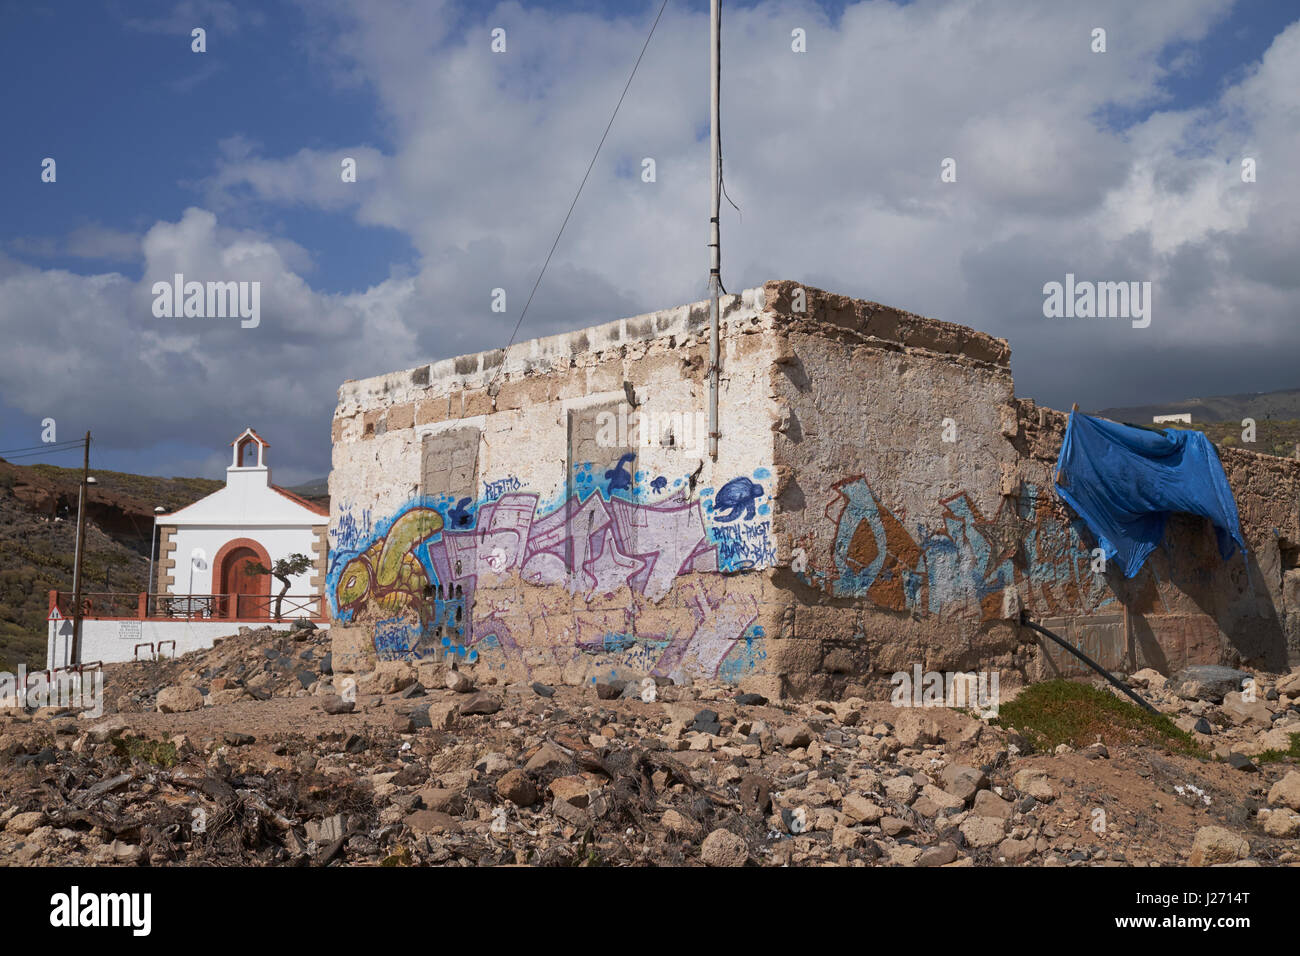 Derelict building with graffiti at El Puertito, Tenerife, Canary Islands, Spain. Stock Photo